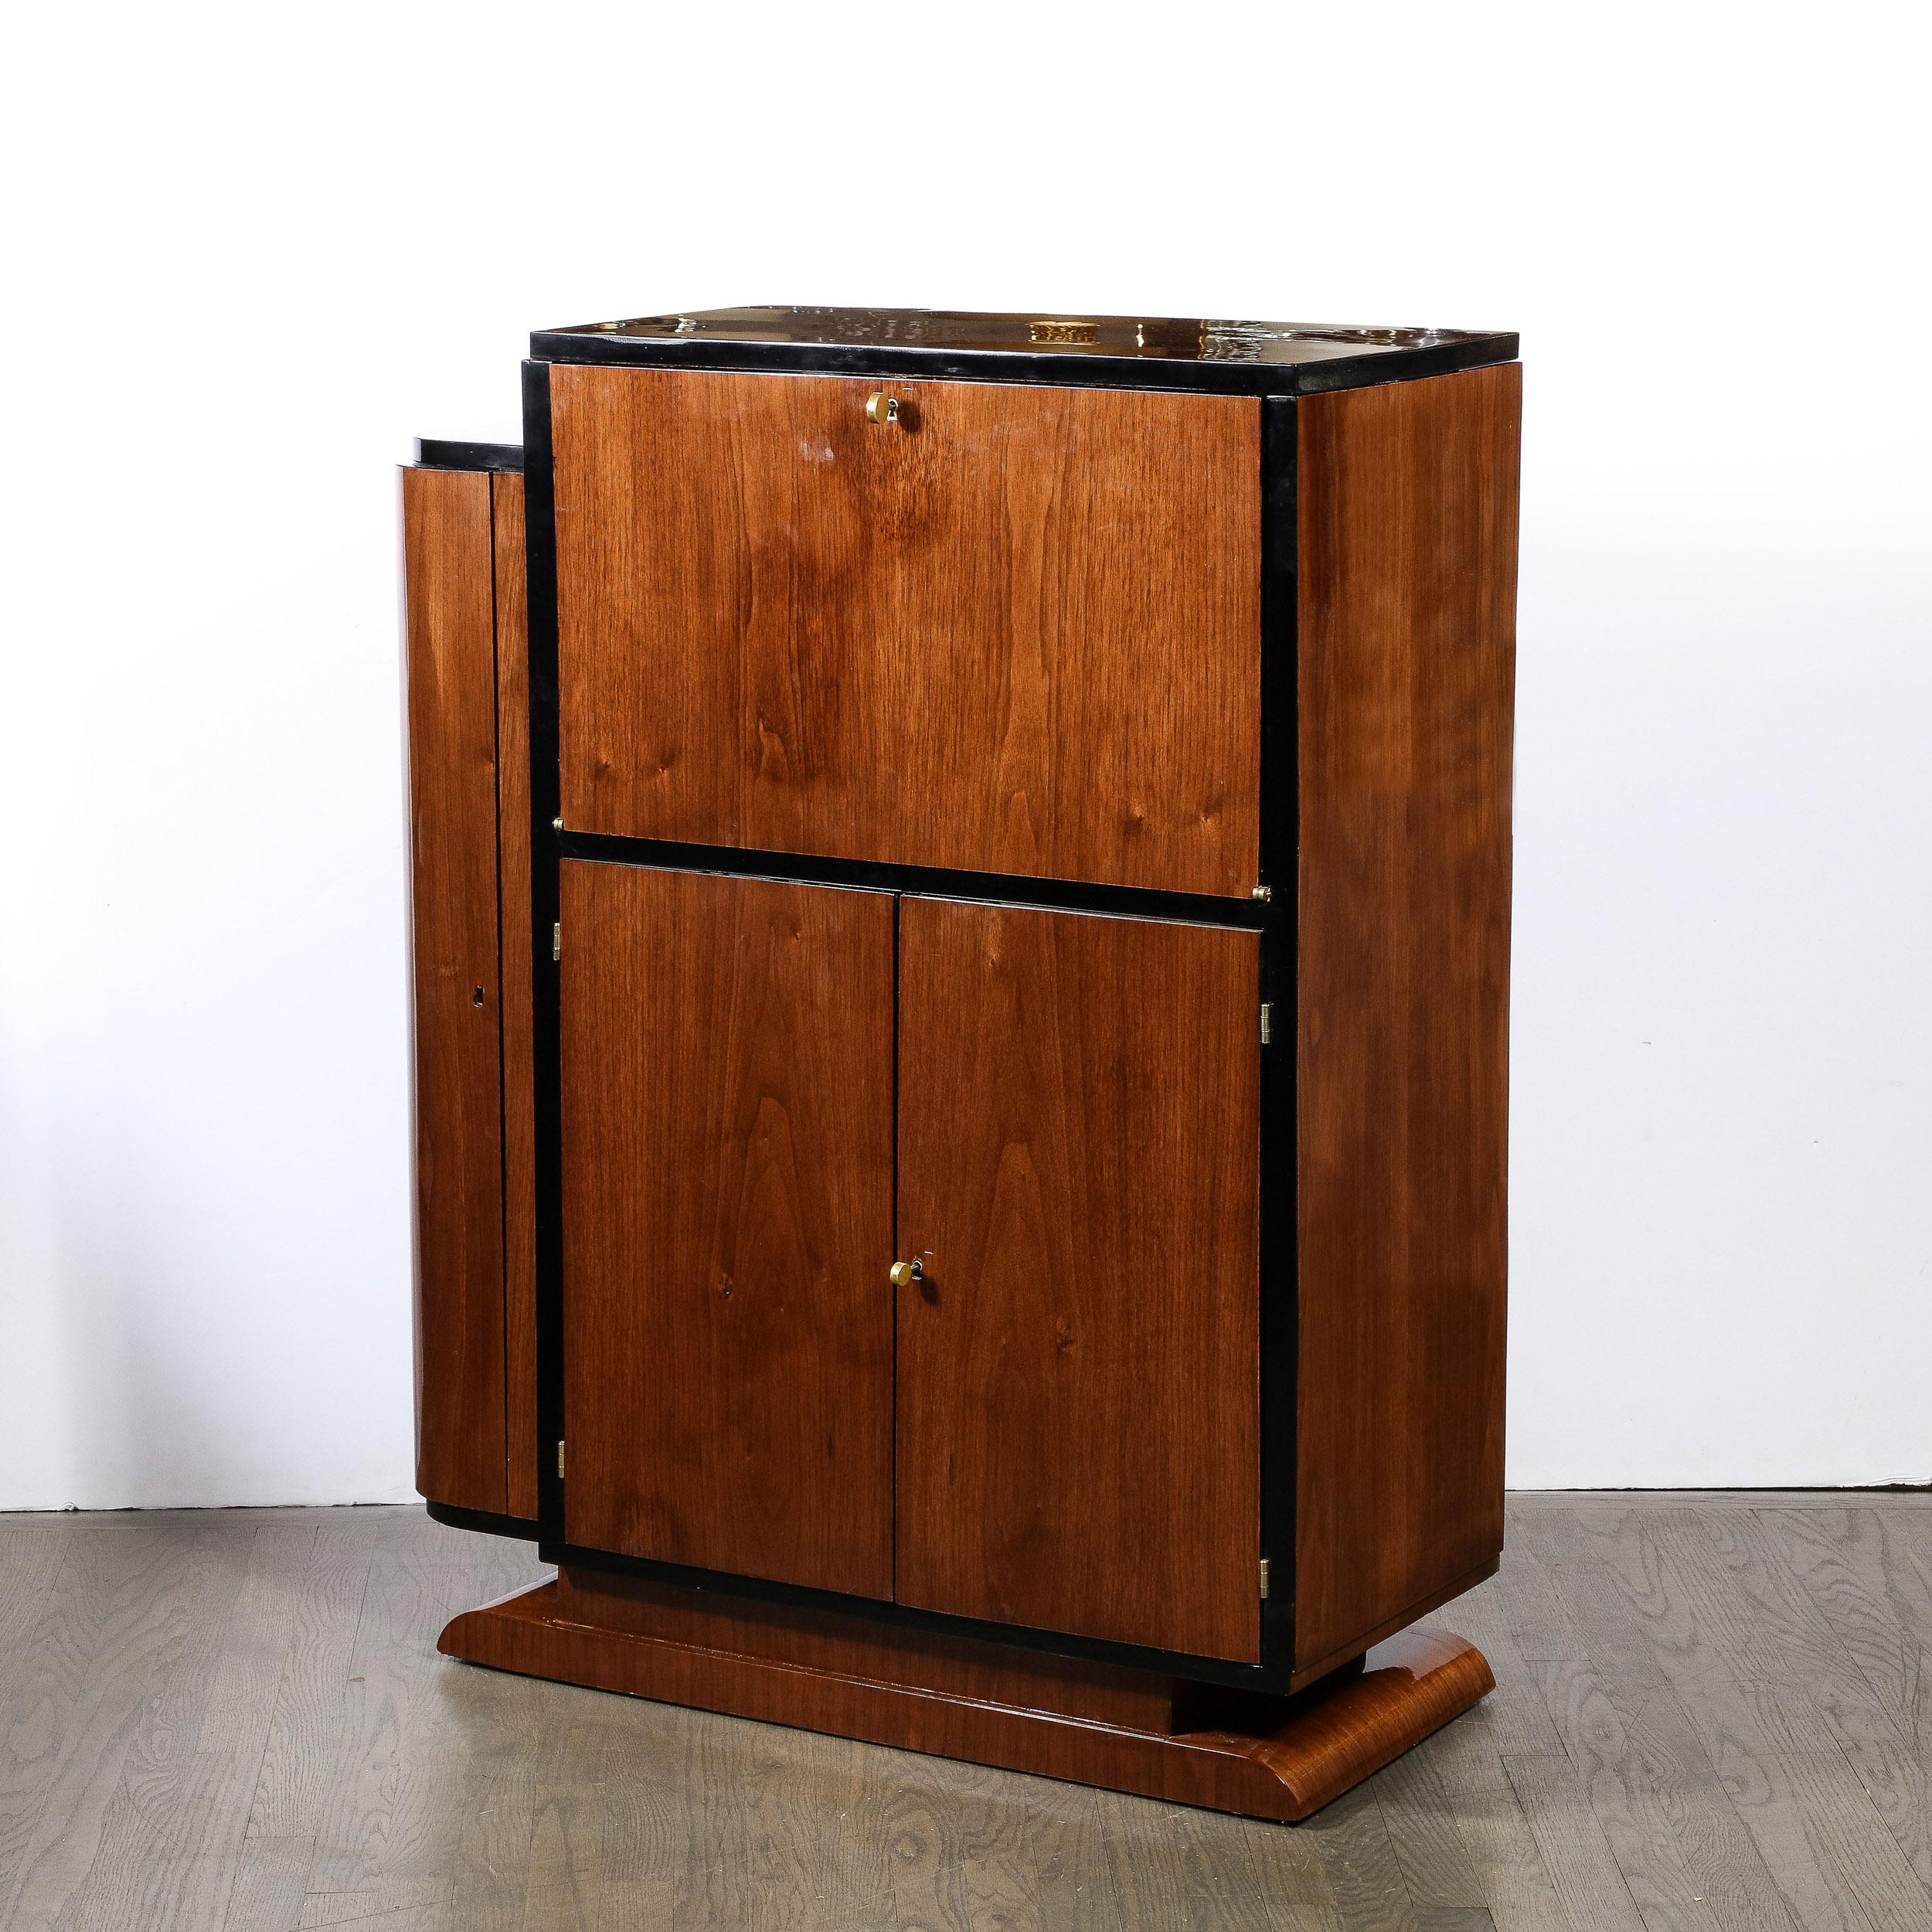 This beautifully proportioned and finished Art Deco Machine Age Bar Cabinet in Book-matched Walnut with Black Lacquer Accents originates from the United States, Circa 1935. This Bar Cabinet features highly thoughtful design and material execution,